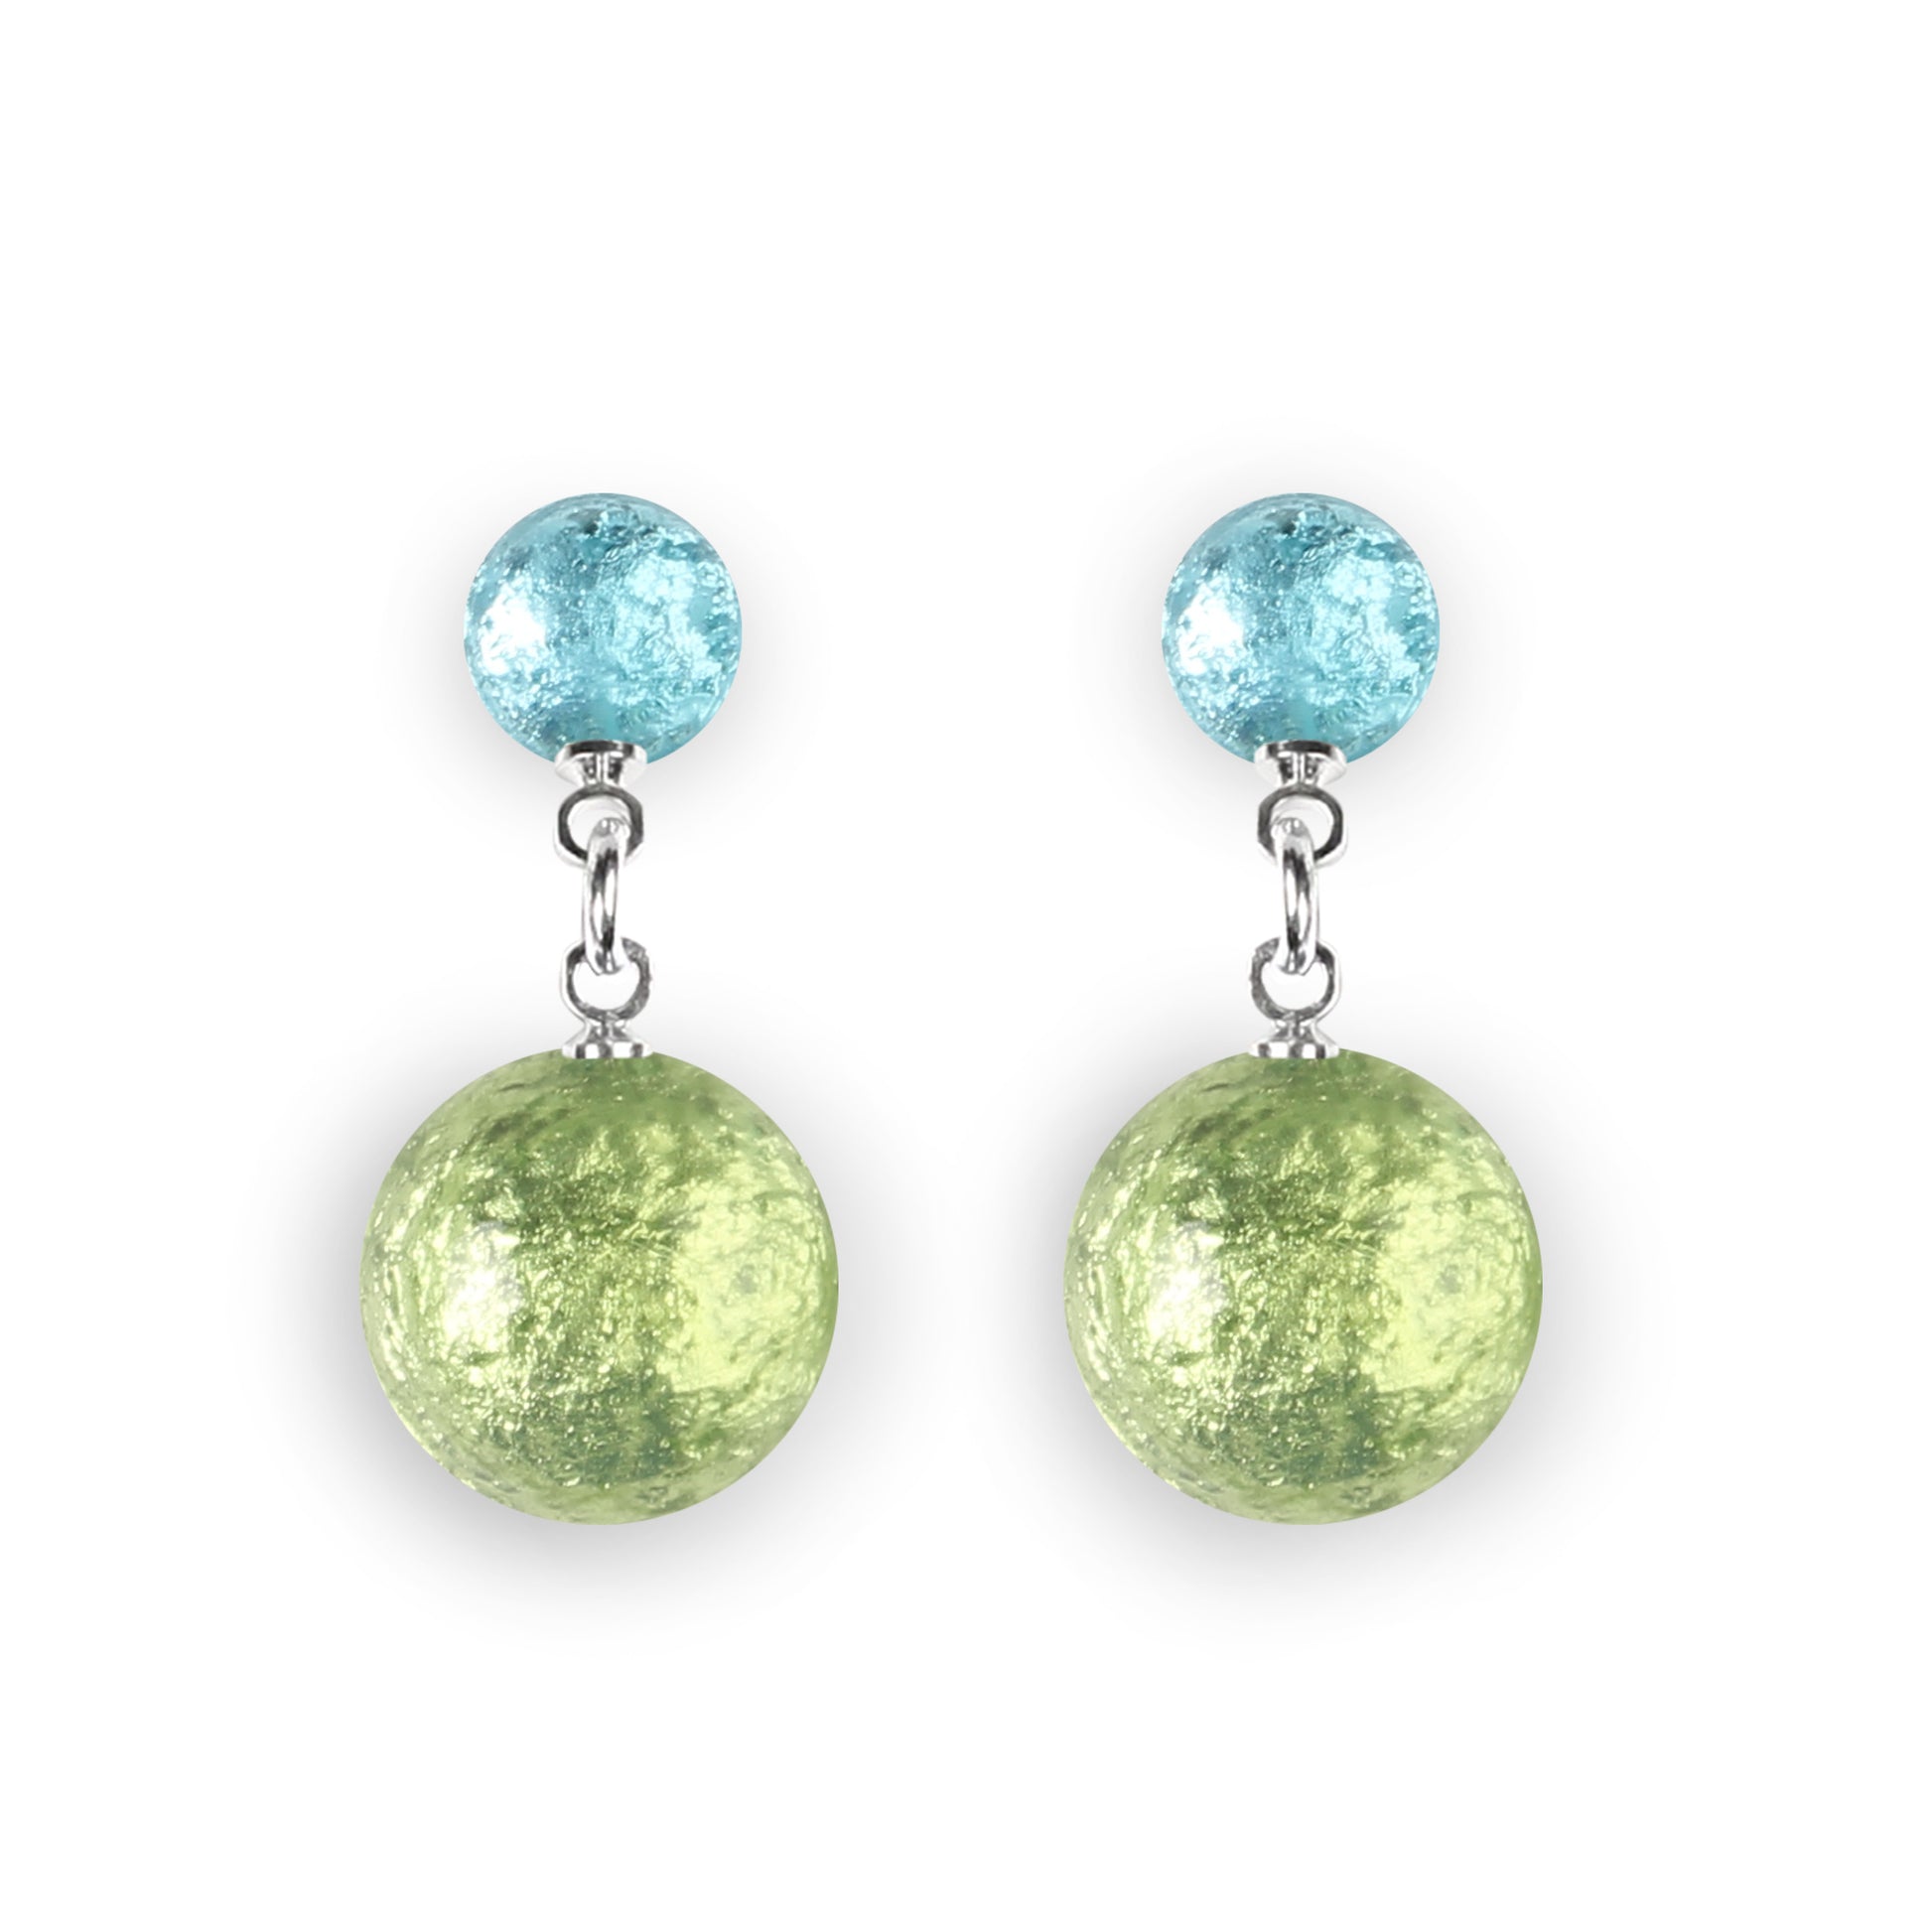 Orchard Cabouchon Shiny Double Drop Stud Earrings